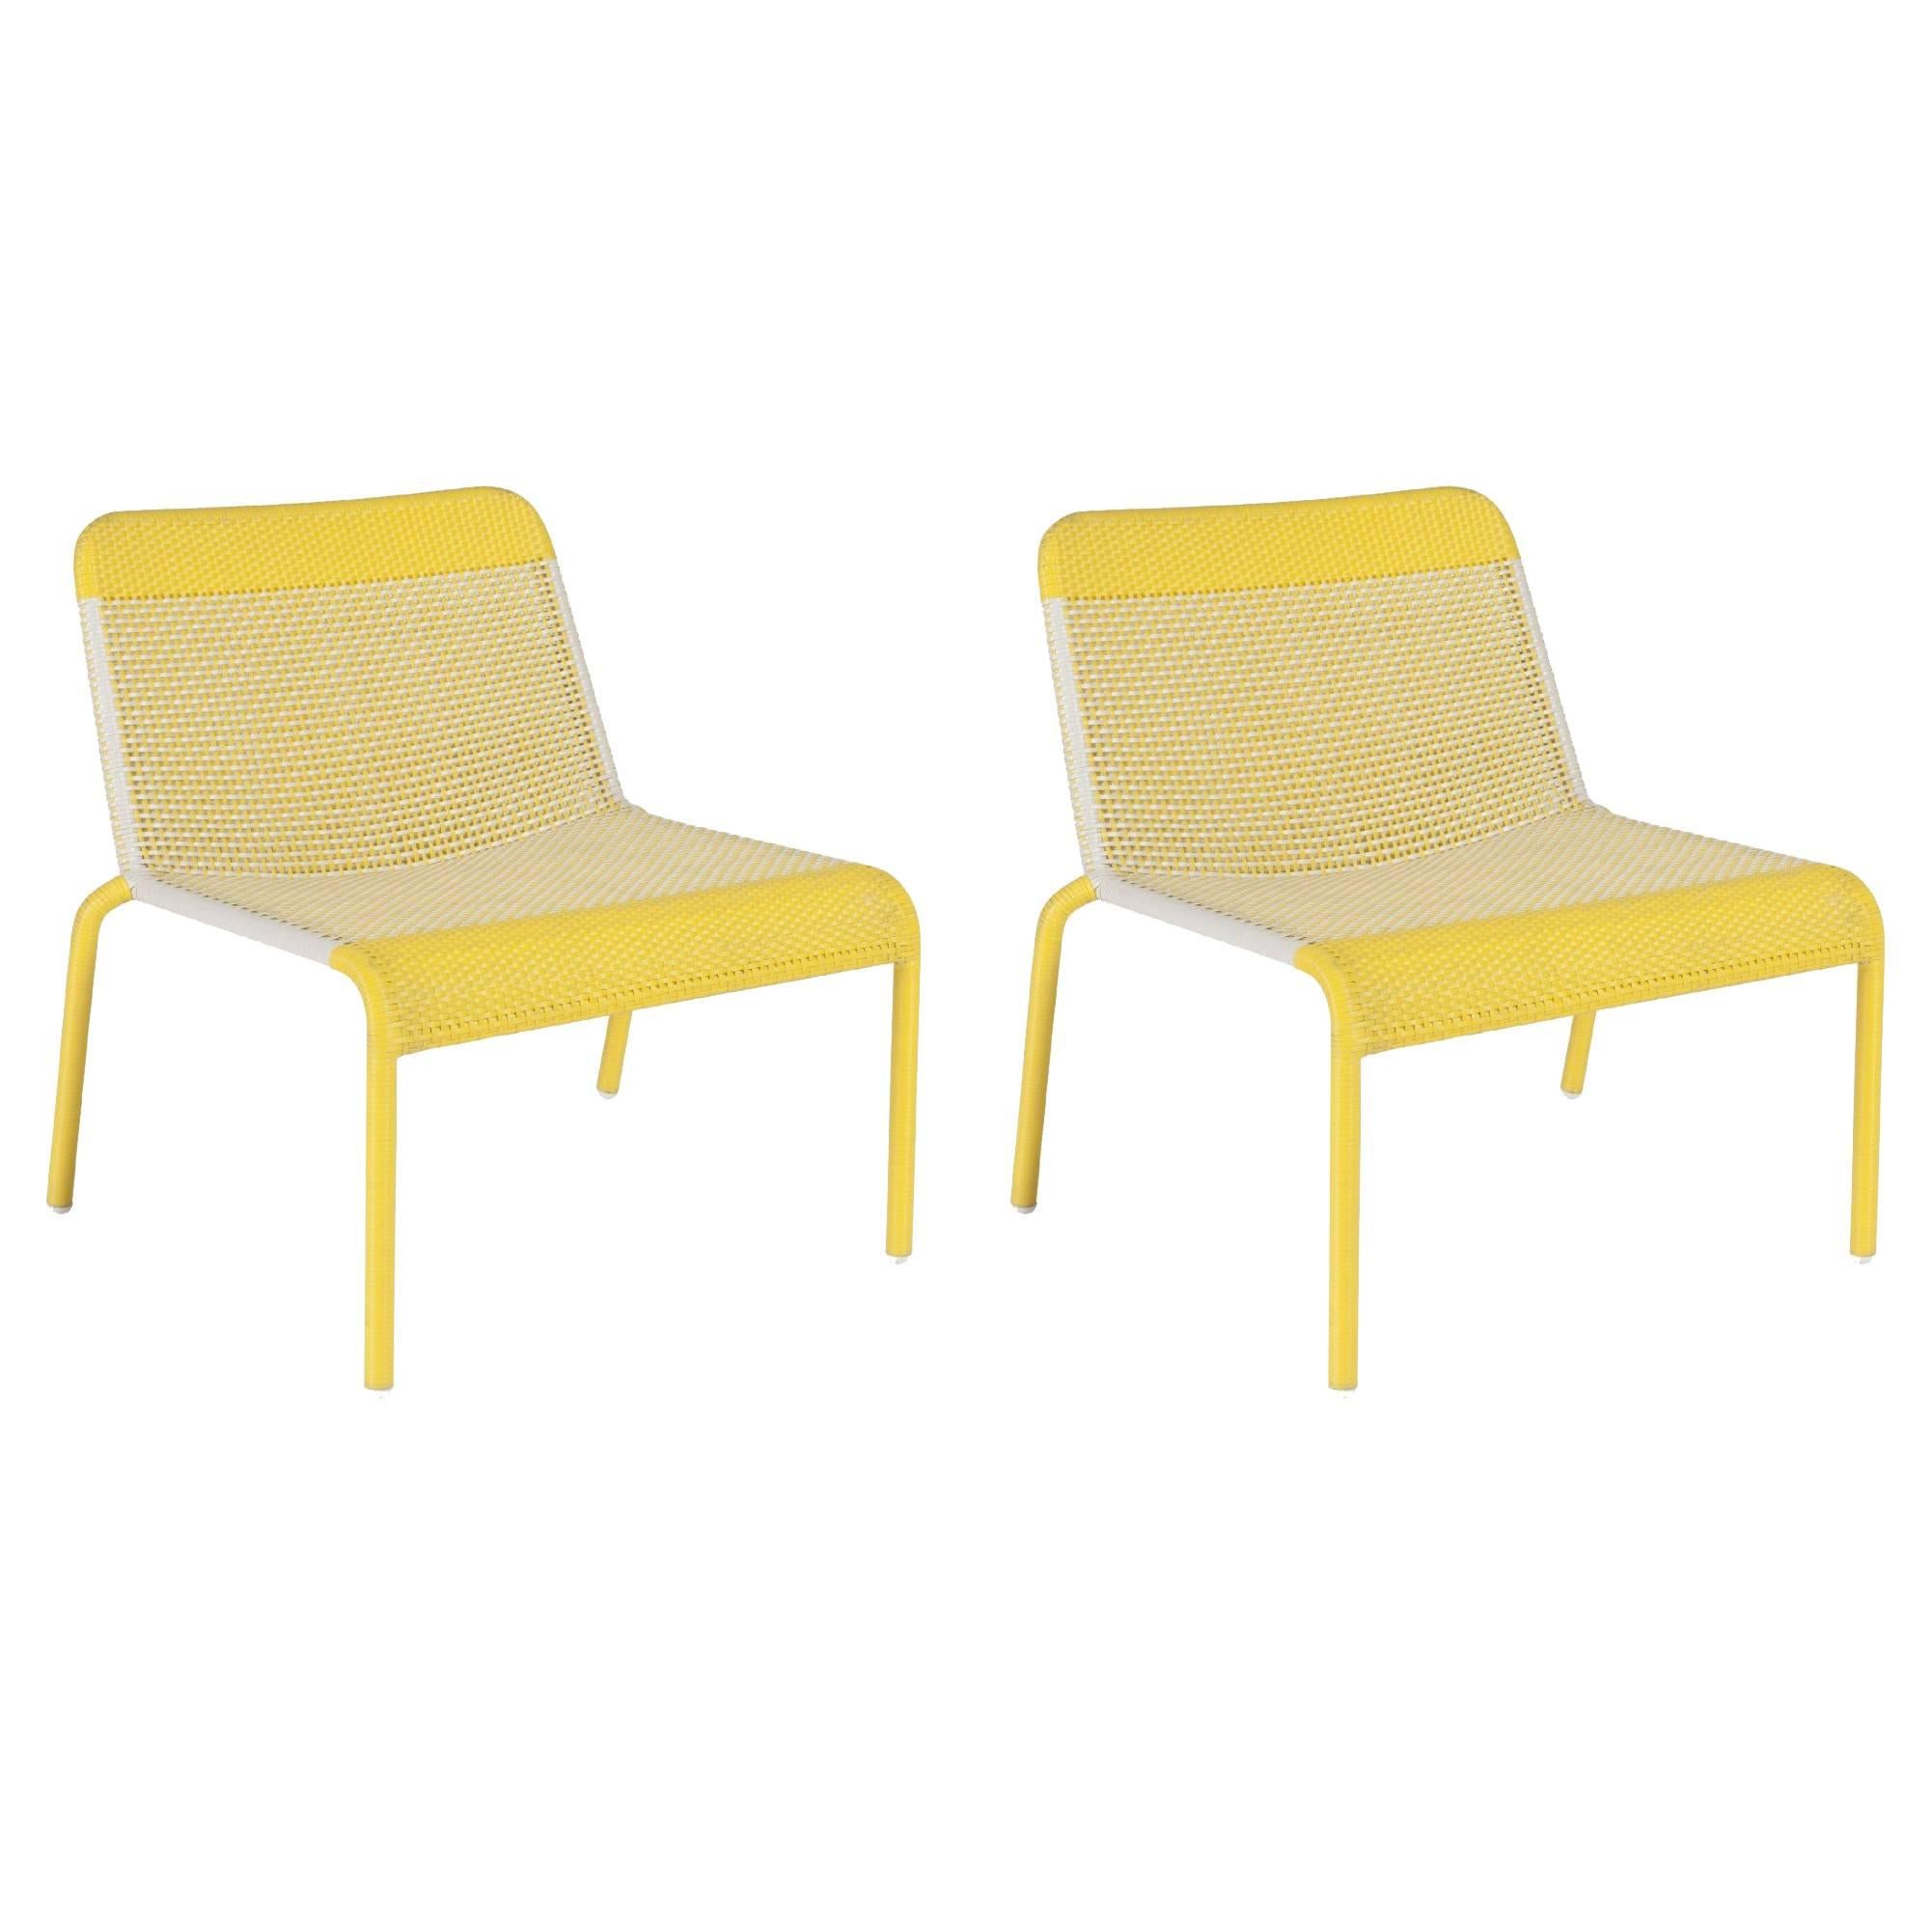 Pair of Yellow Braided Resin French Design and Lounge Armchairs